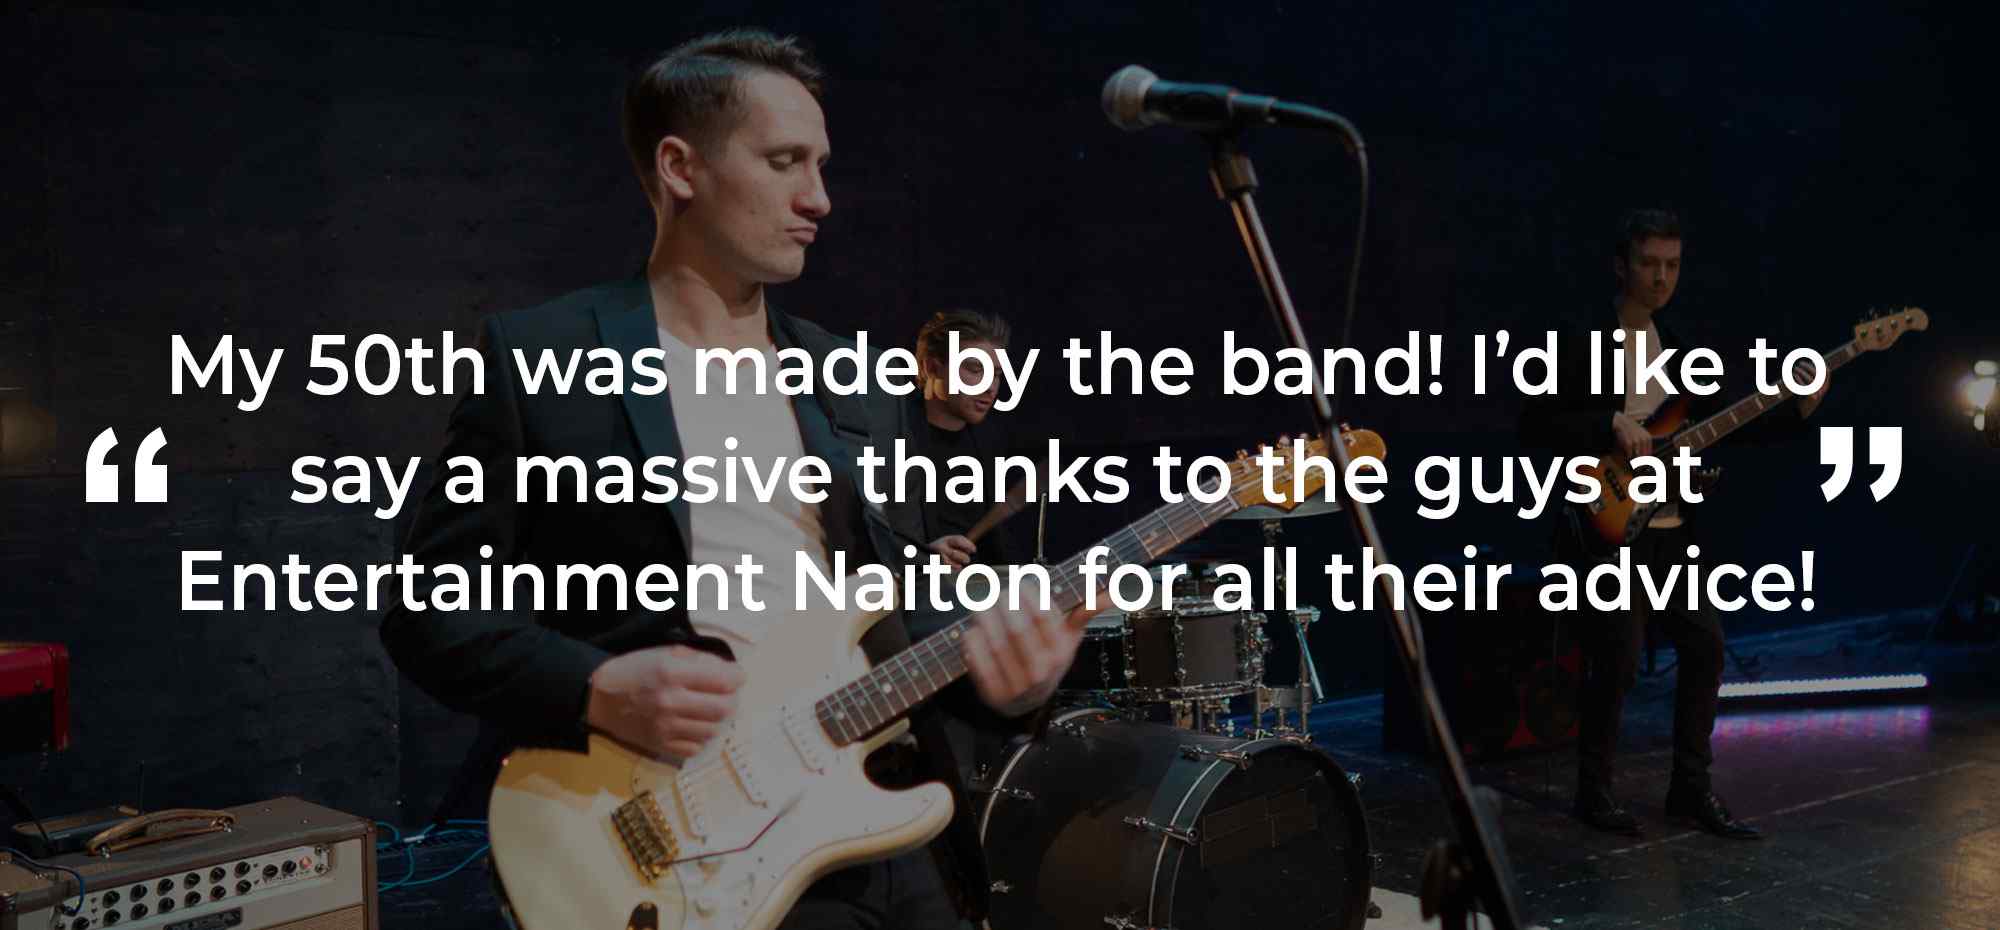 Client Review of a Party Band Staffordshire